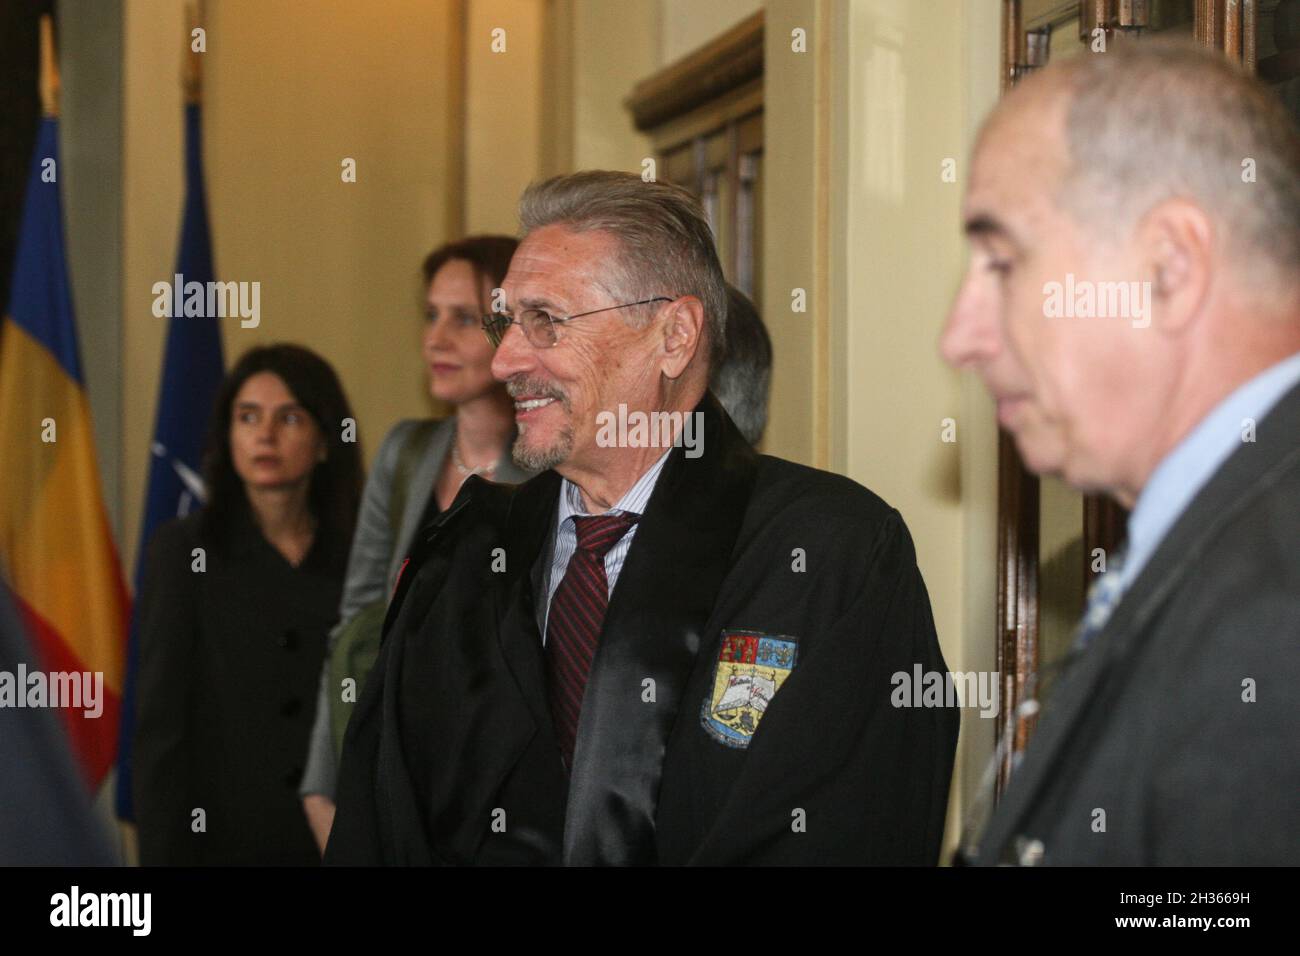 Bucharest, Romania, April 24, 2009: The former president of Romania, Emil Constantinescu during the ceremony organized by the Romanian Academy on the Stock Photo